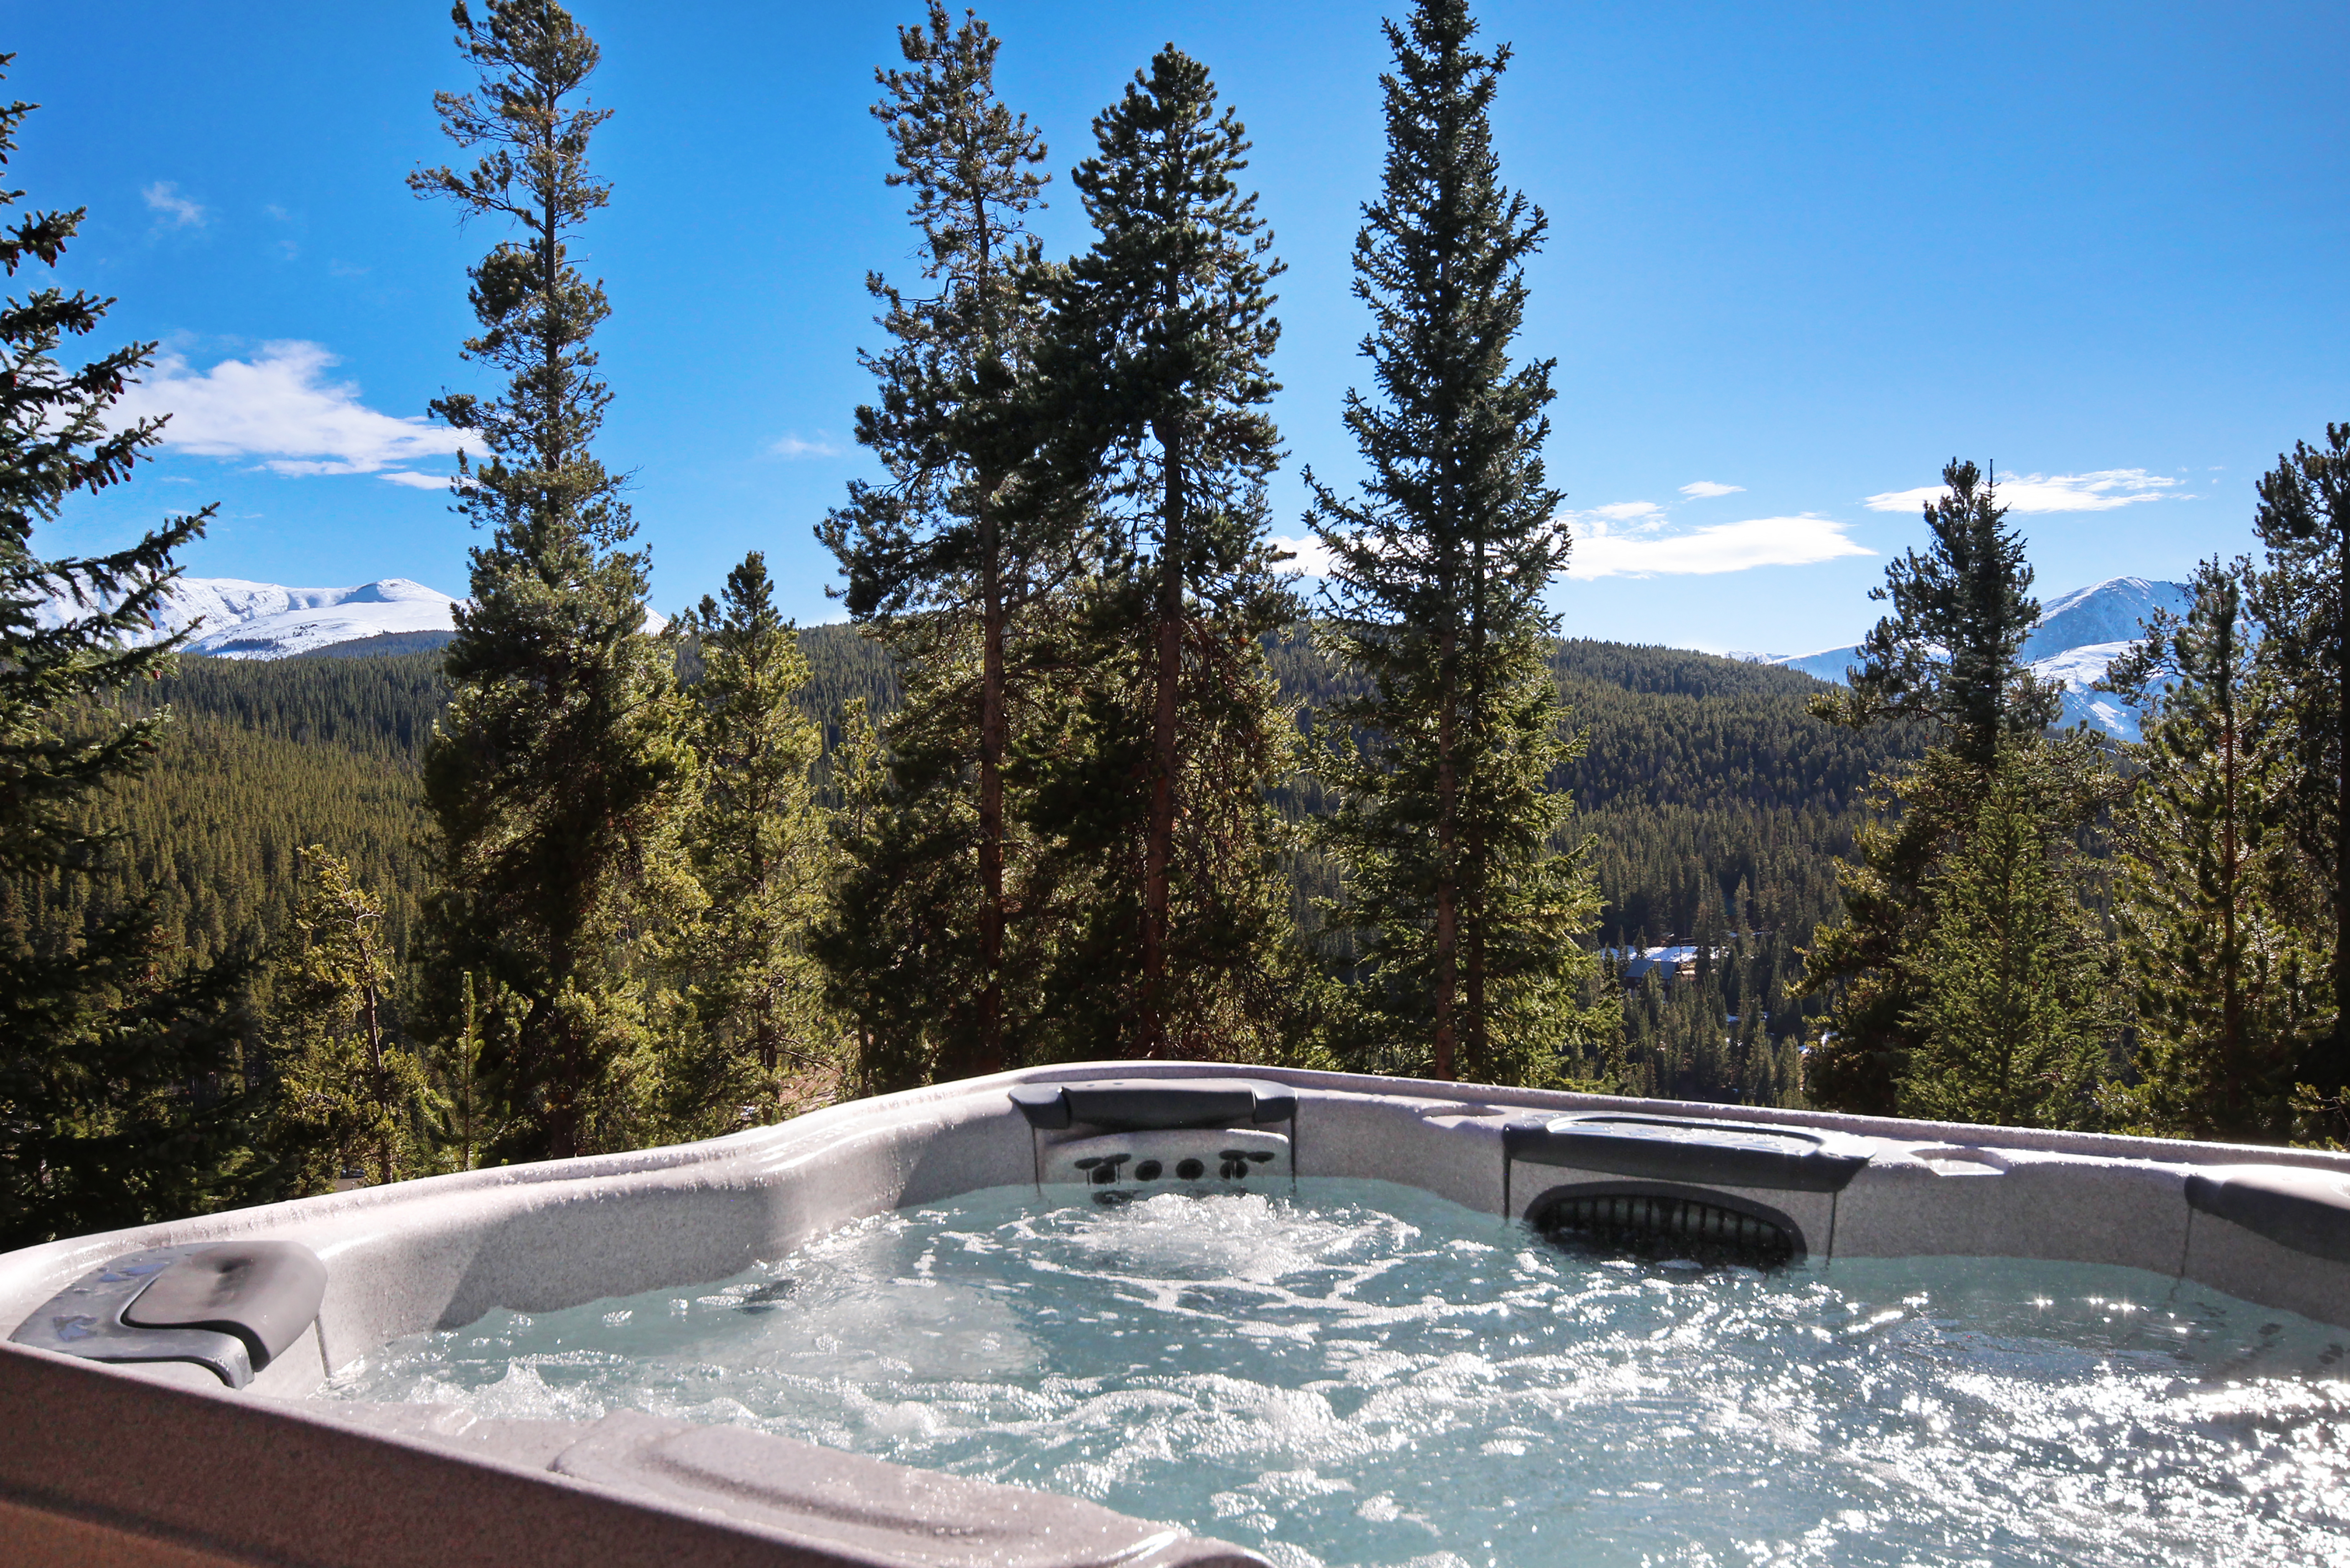 Soak away the cares of the day or sore muscles from the day's activities - 10 Southface Breckenridge Vacation Rental